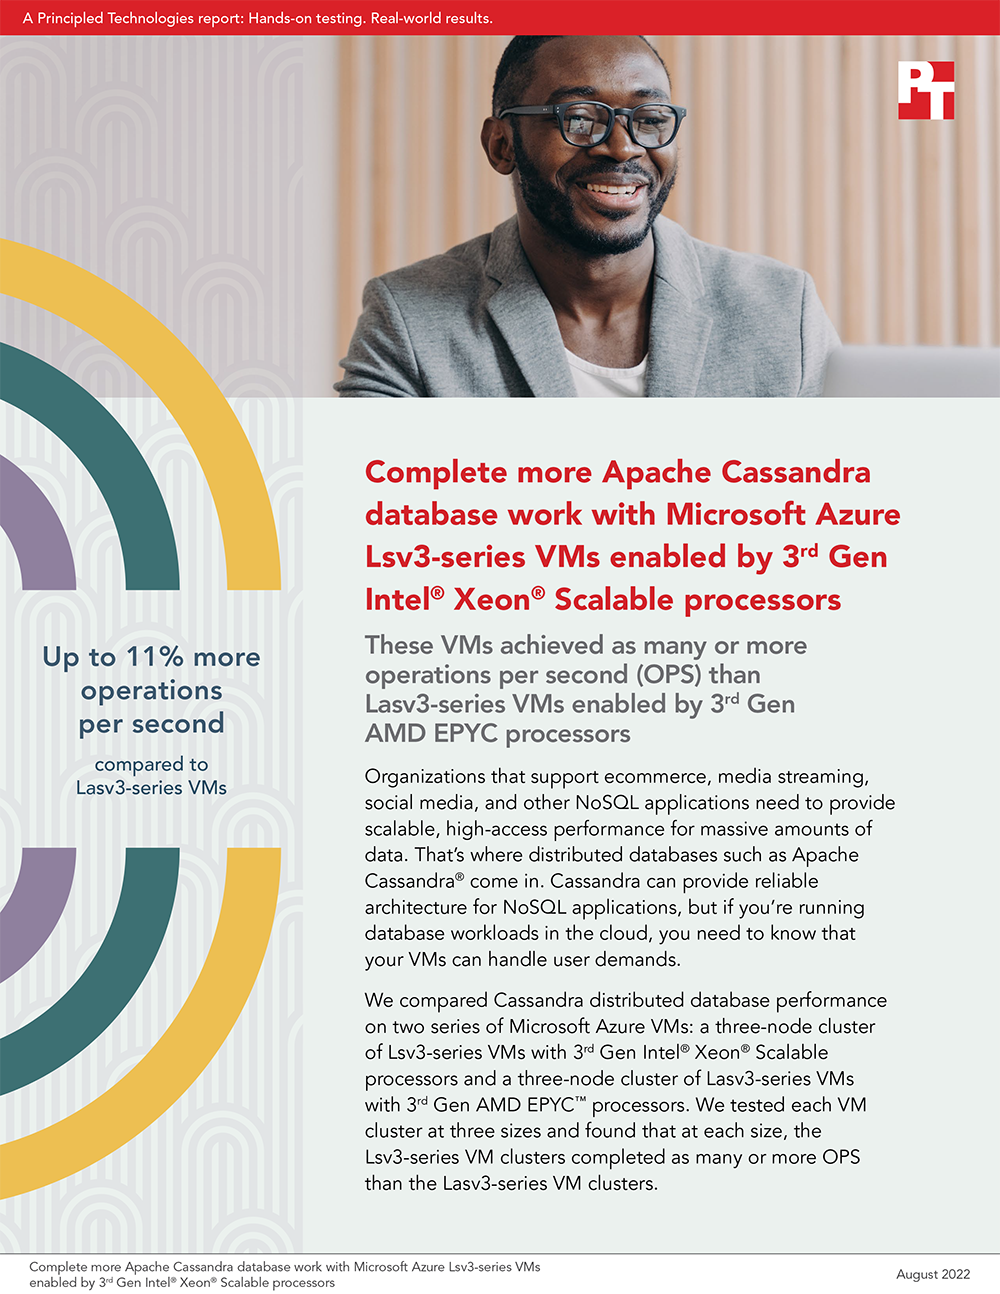  Complete more Apache Cassandra database work with Microsoft Azure Lsv3-series VMs enabled by 3rd Gen Intel Xeon Scalable processors